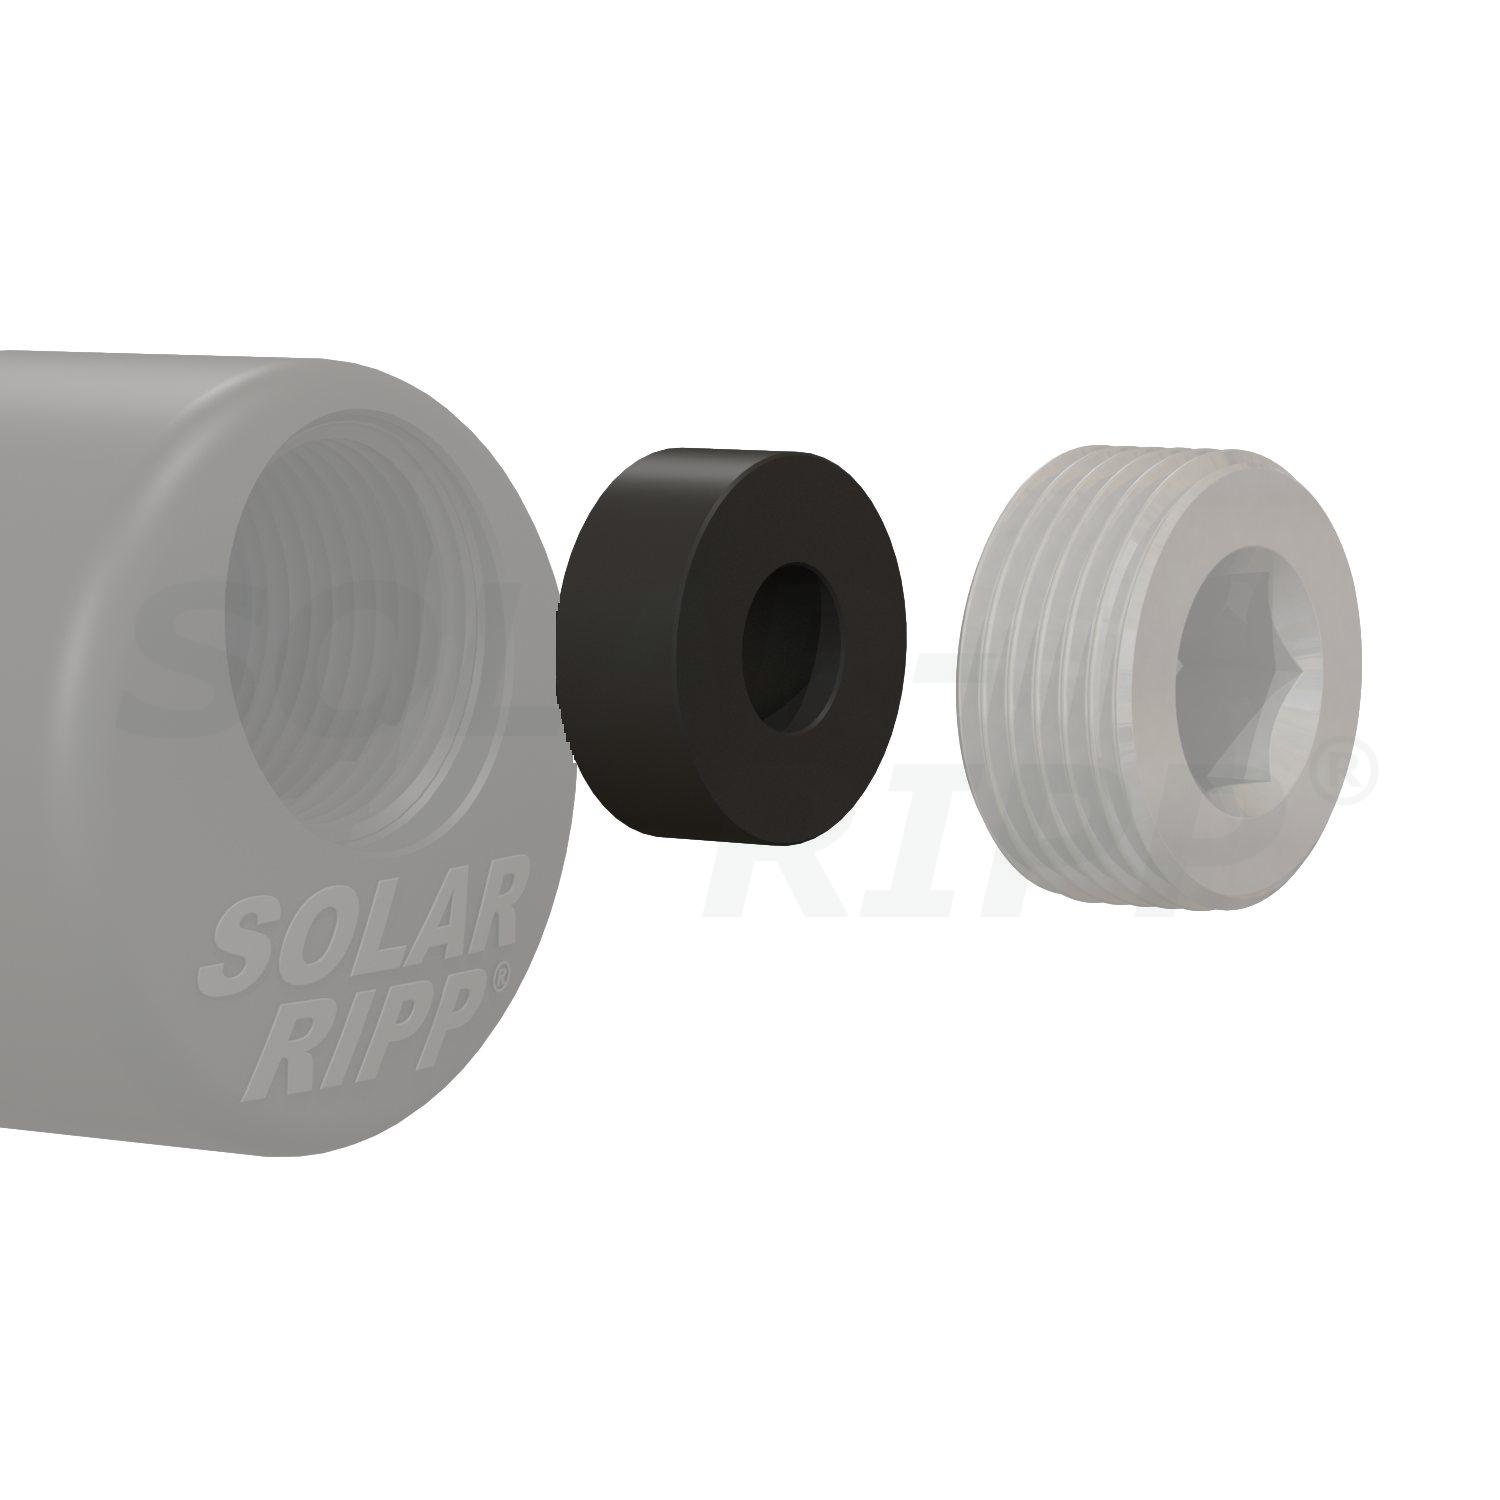 SOLAR-RIPP ® flat seal for hand tap and threaded plug